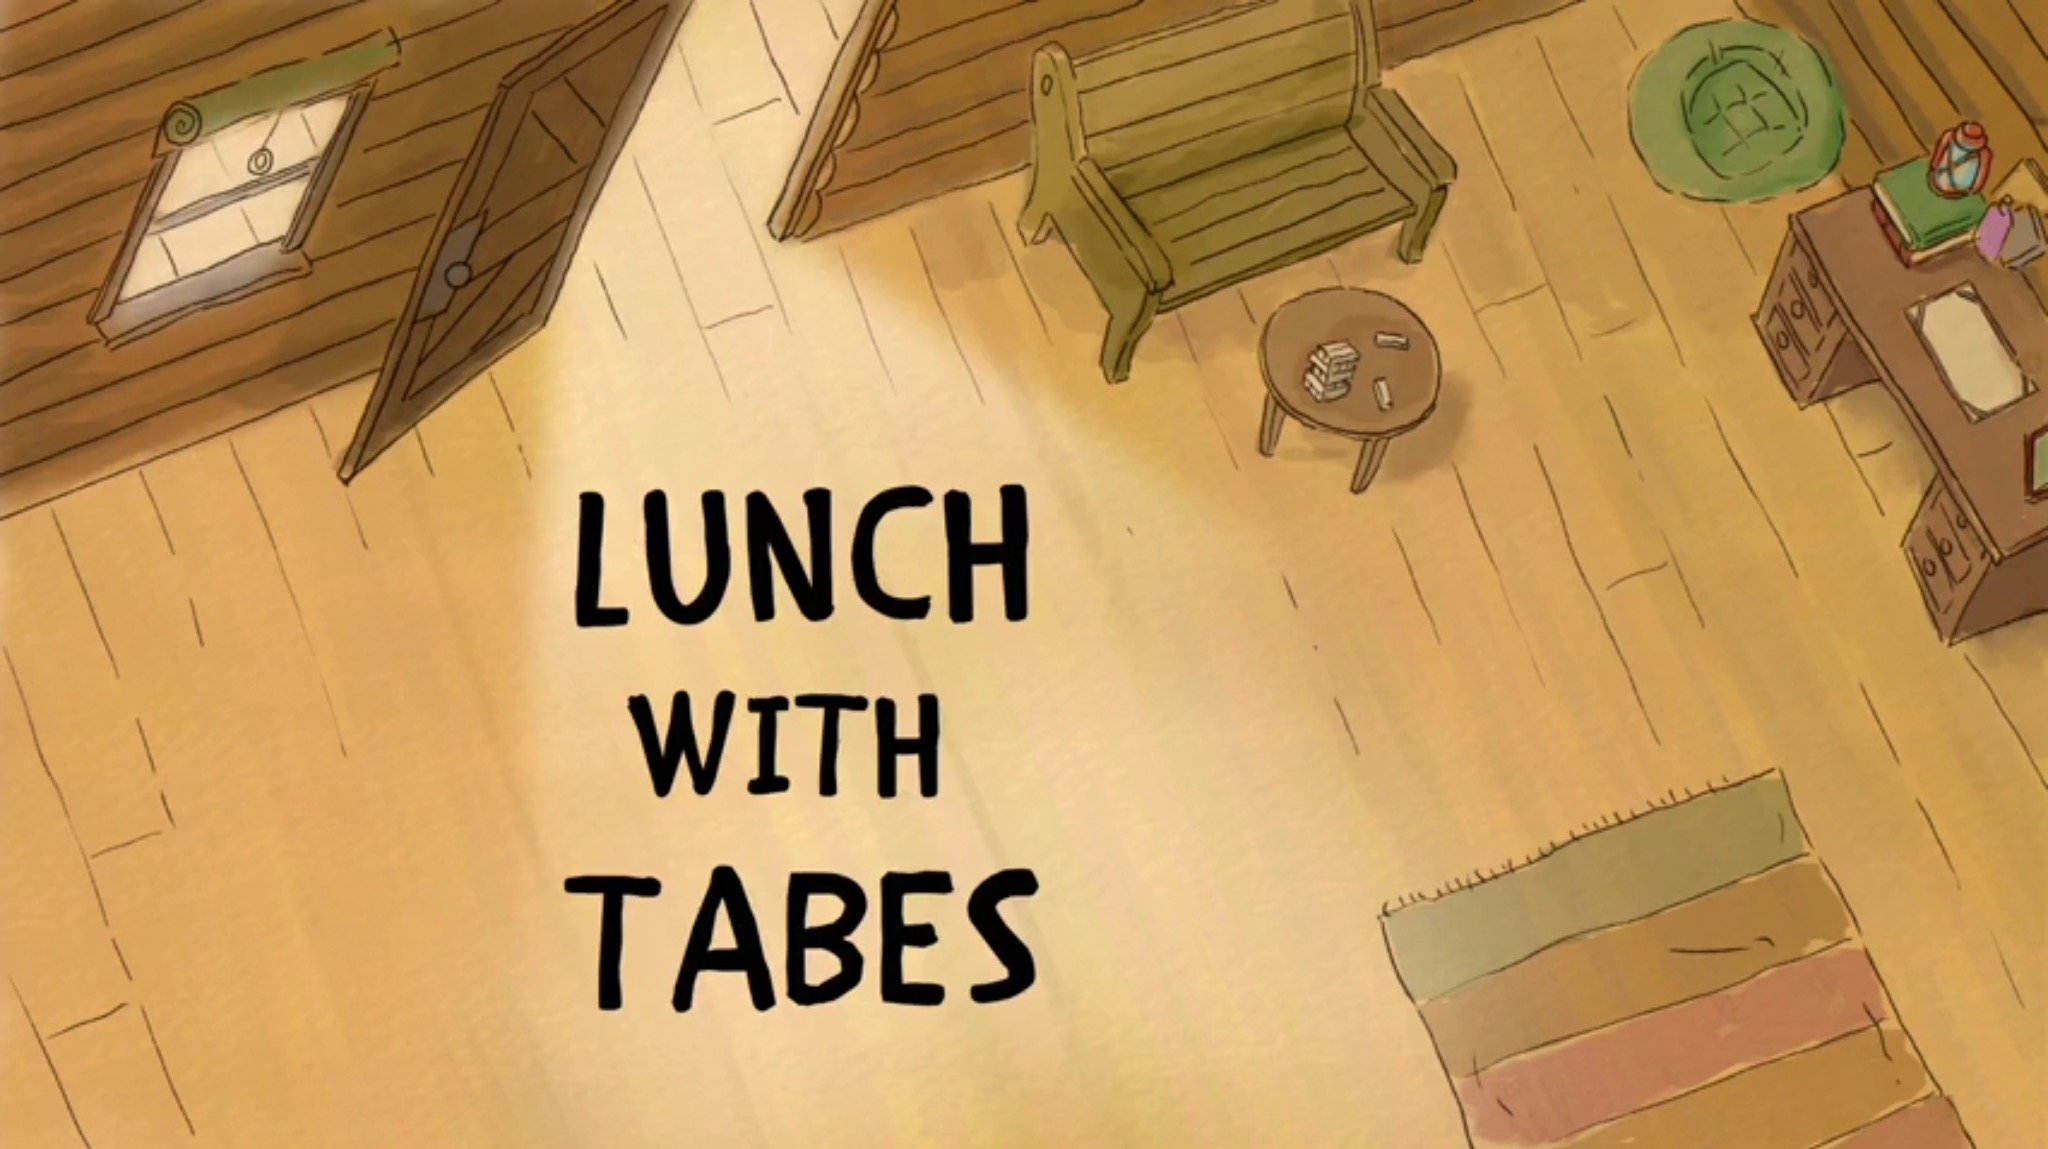 15 серия 3 сезона Lunch with Tabes